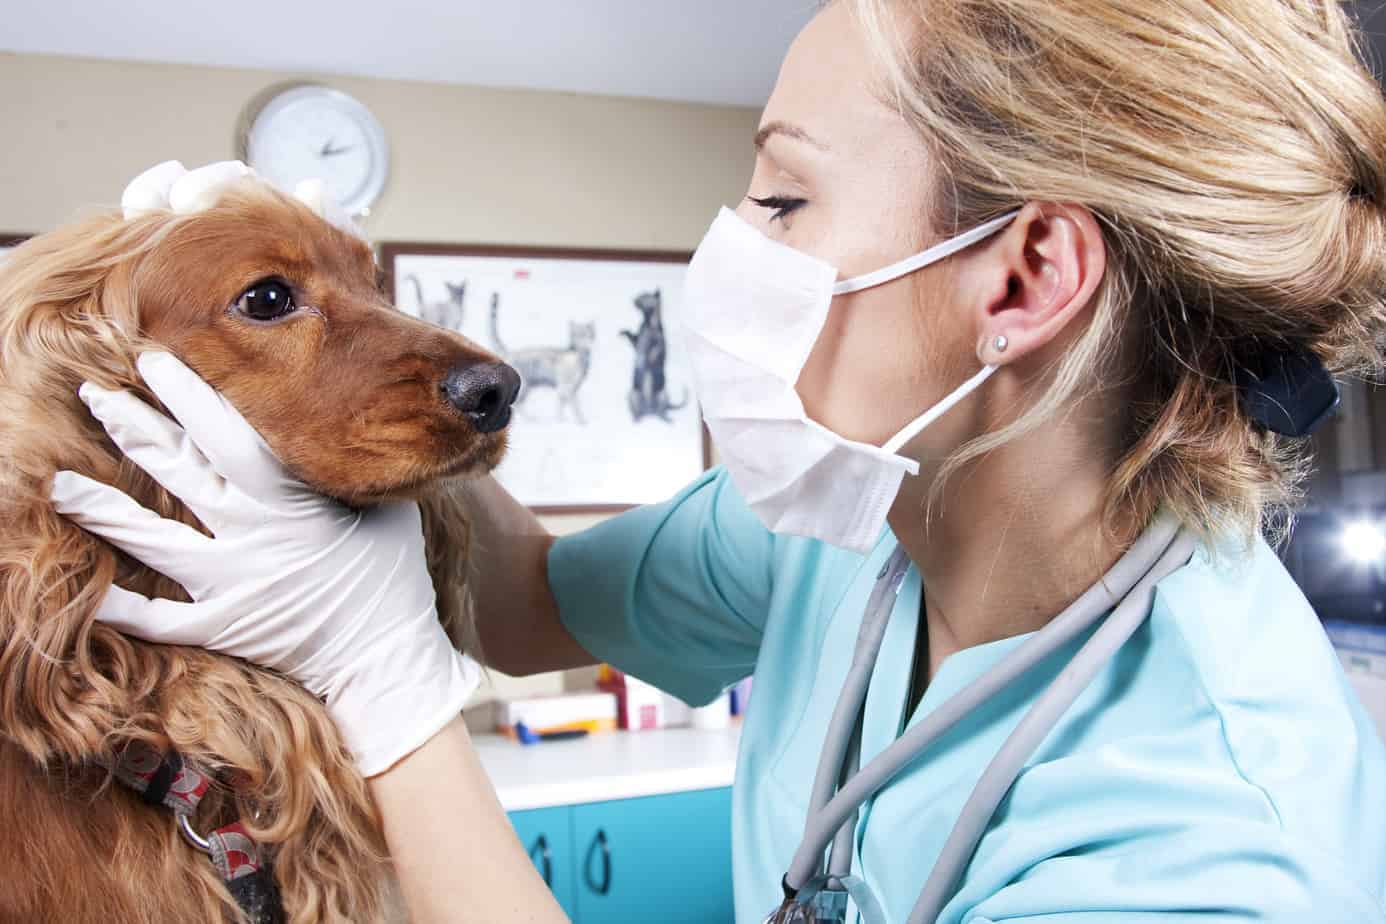 7 questions to ask before you buy pet insurance for your dog